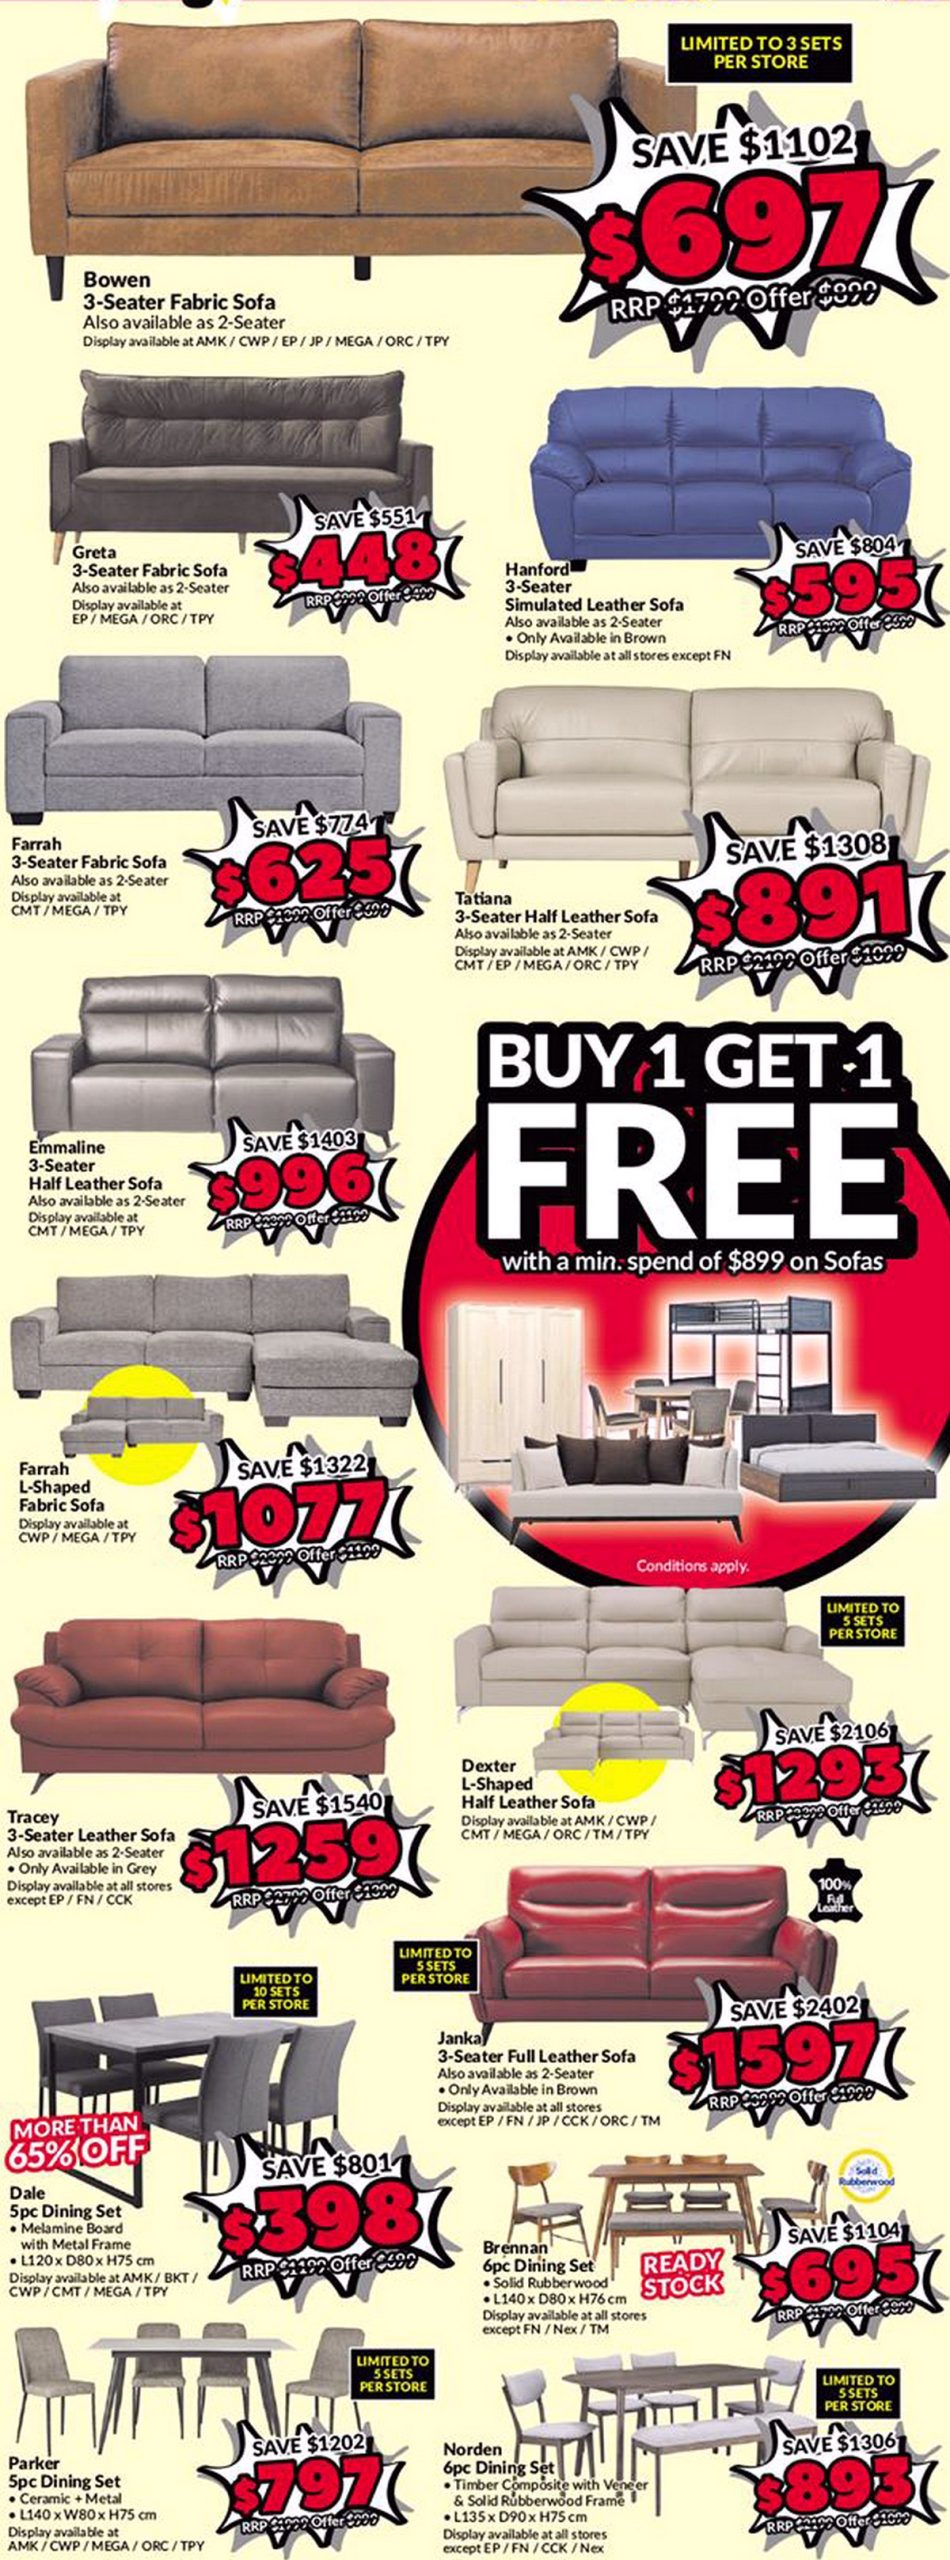 Courts-Furniture-Clearance-Warehouse-Sale-Sofa-Dining-Table-Sets-Chairs-2021-Singapore-scaled 13-17 May 2021: COURTS Massive Furniture & TV Clearance Sale! Up to 65% OFF & Buy 1 Free 1 Deals!